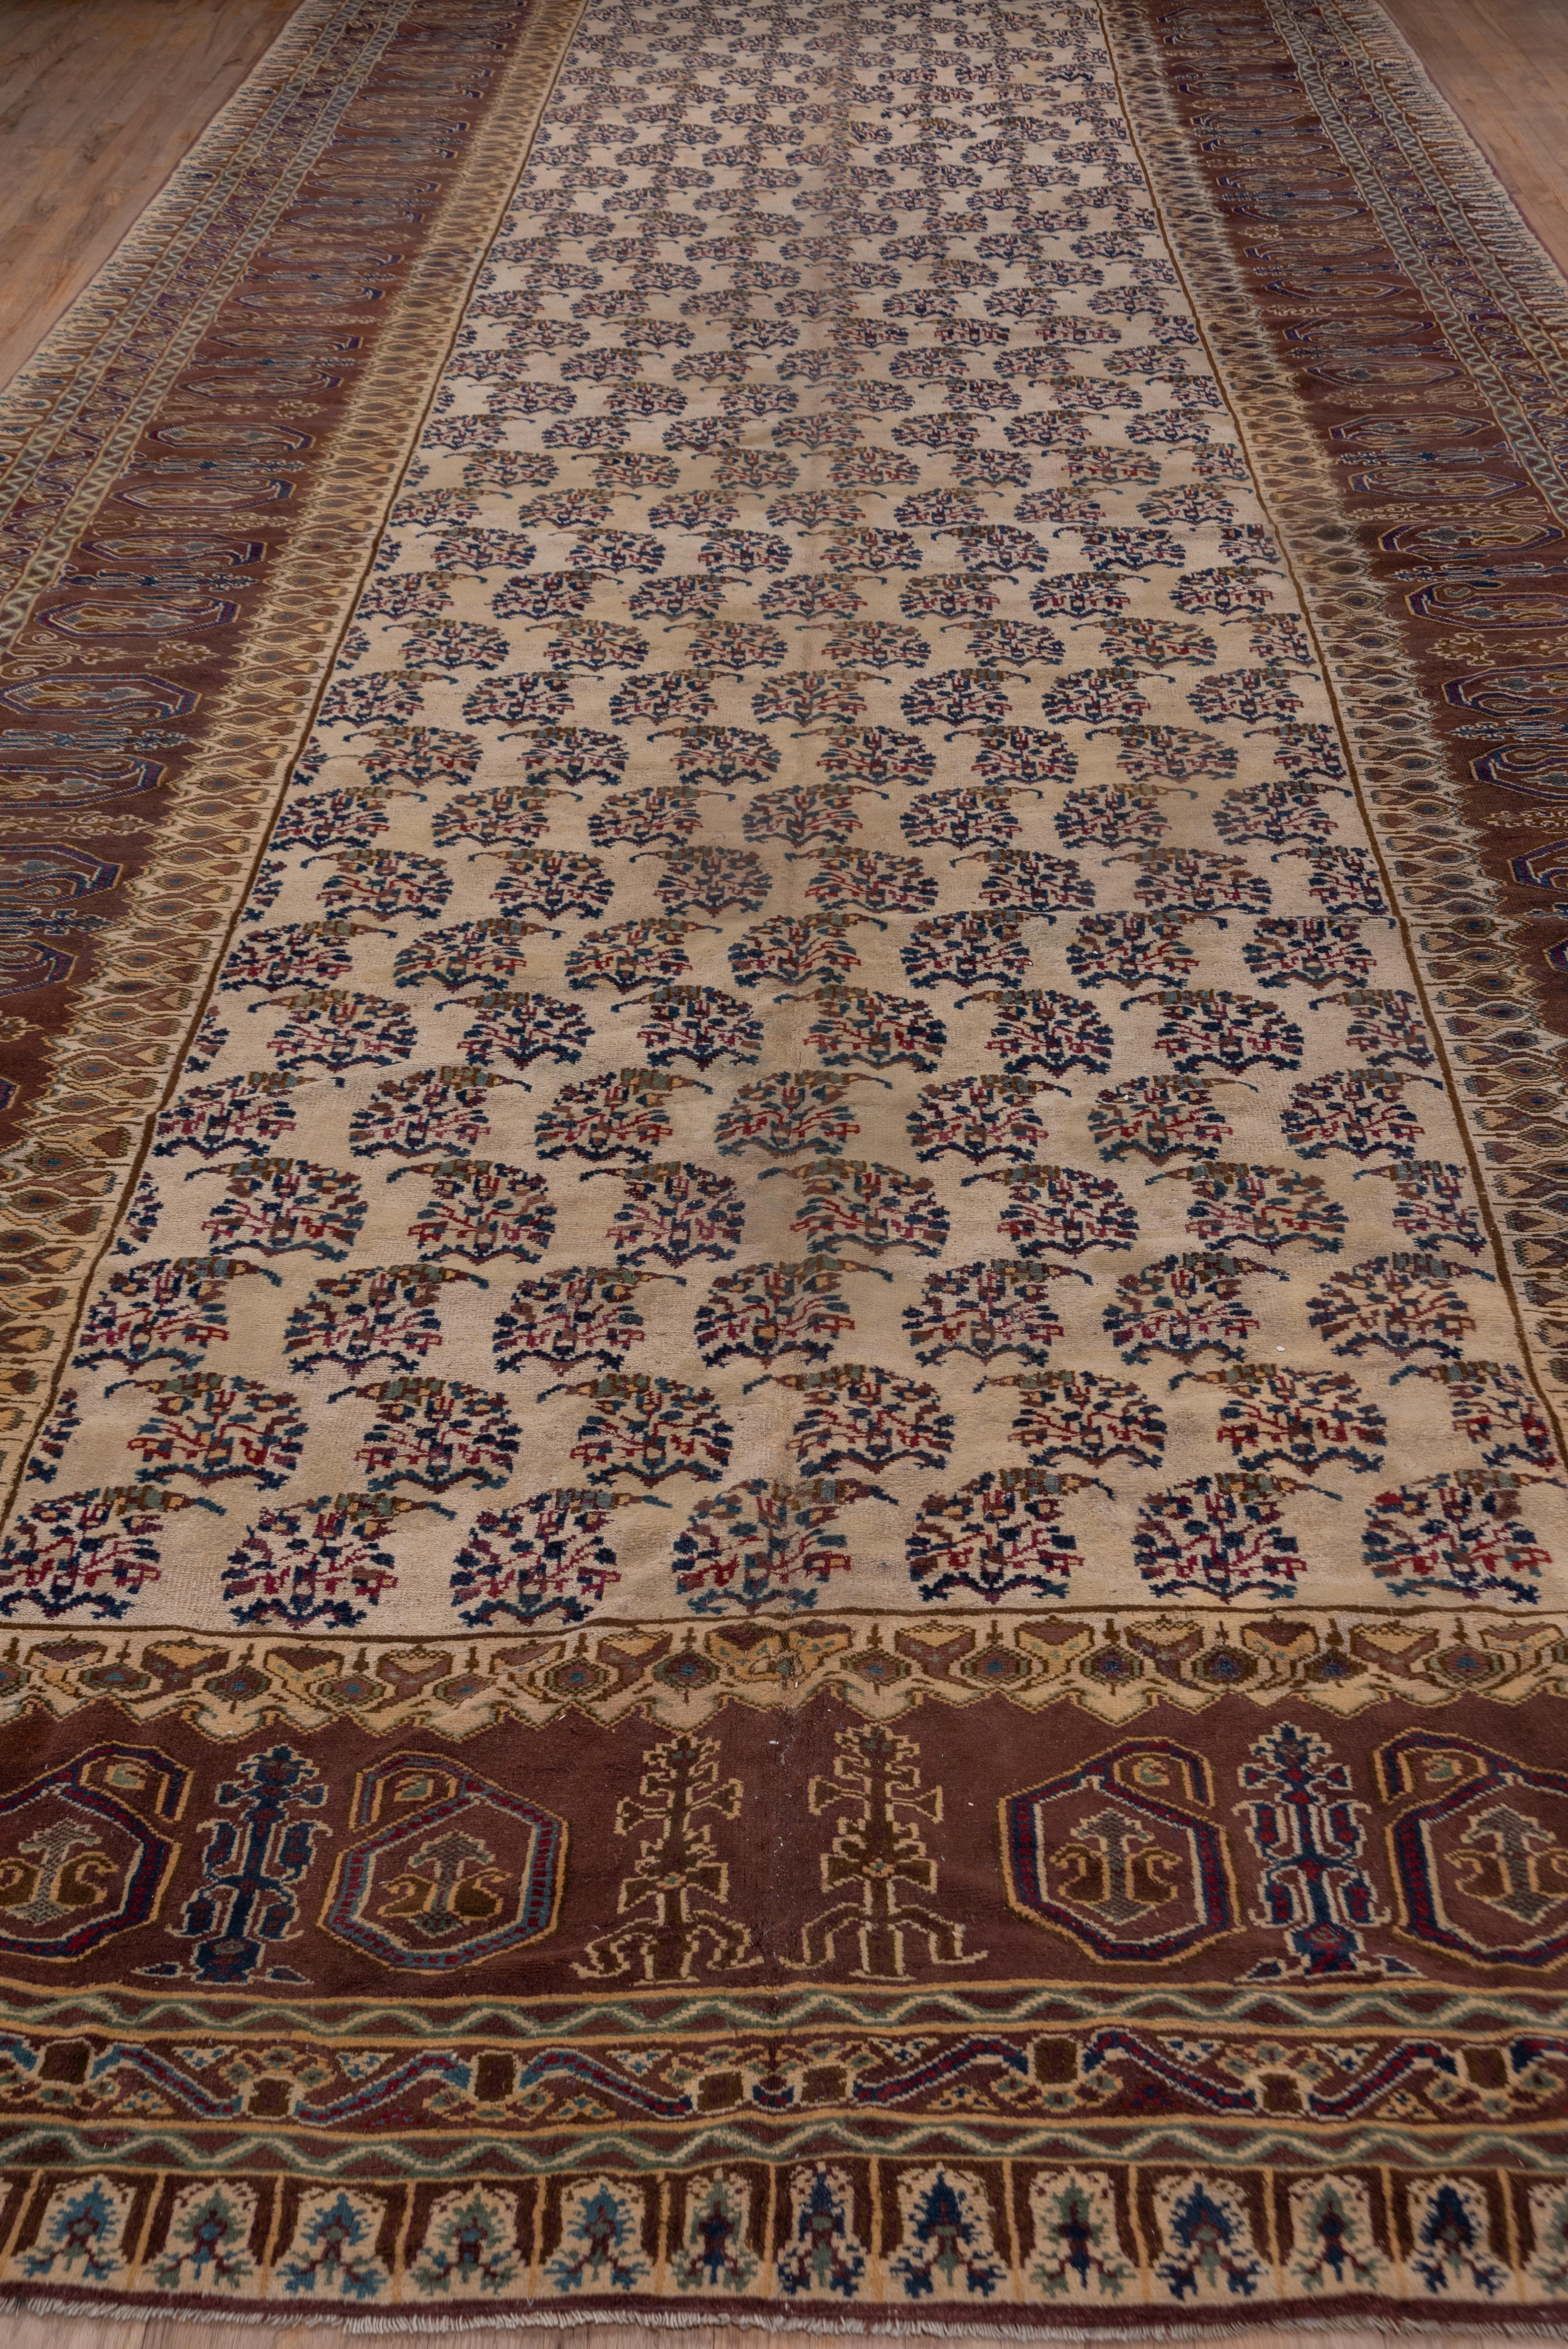 This northern Indian workshop carpet, shows a cream field set with reversing rows of dark blue floral bottehs. The botteh theme continues in the red-brown wide main border with large, faceted cones. The condition is generally quite good with